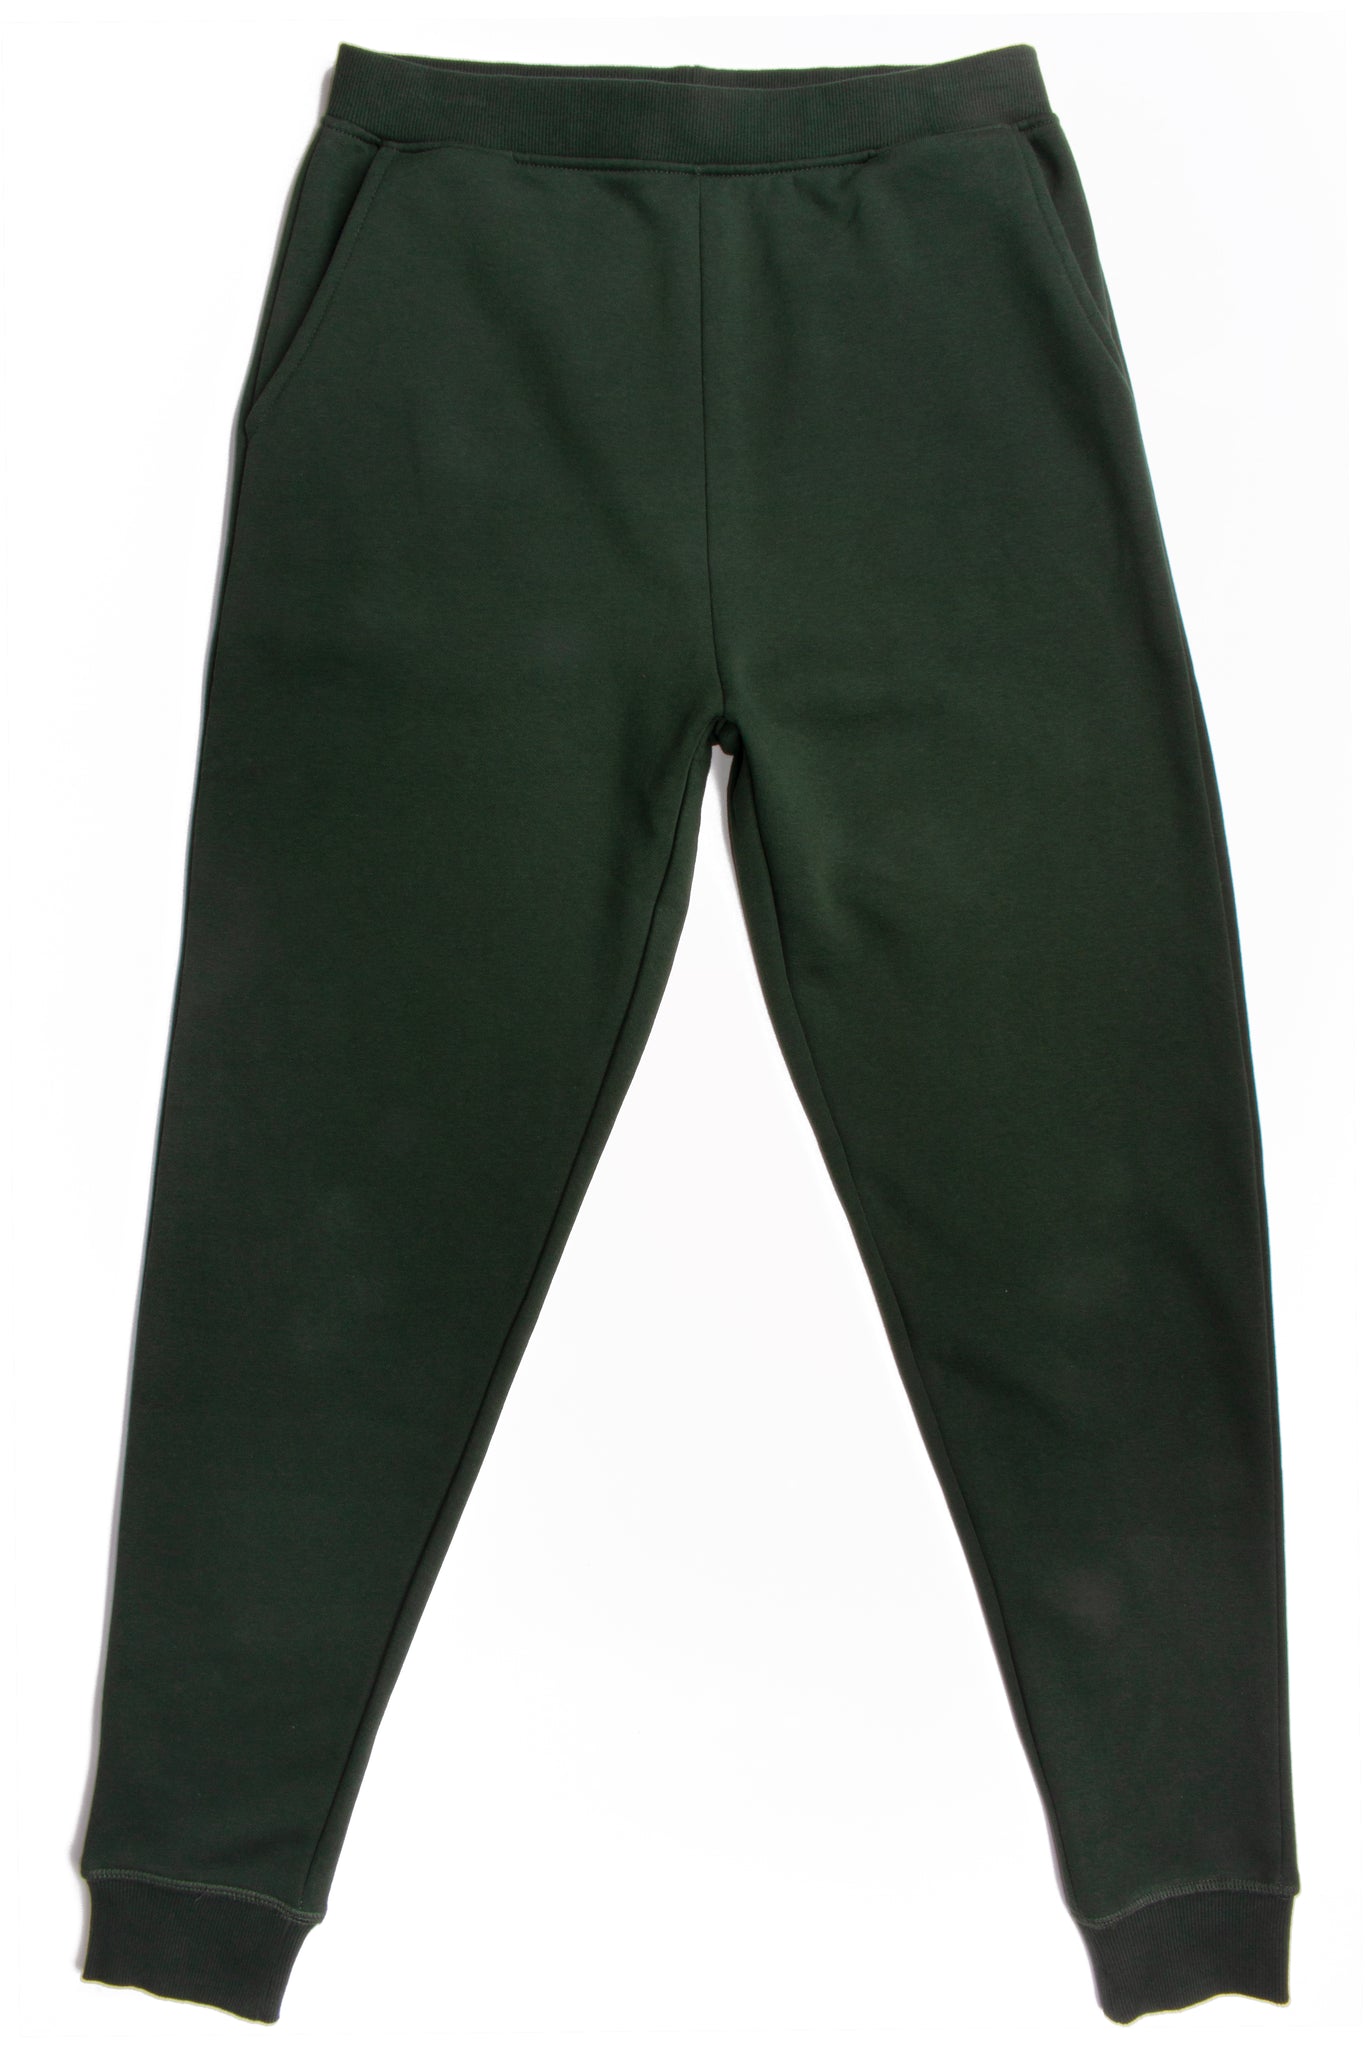 HERO-5020R Youth Joggers - Forest Green (Relaxed Fit)